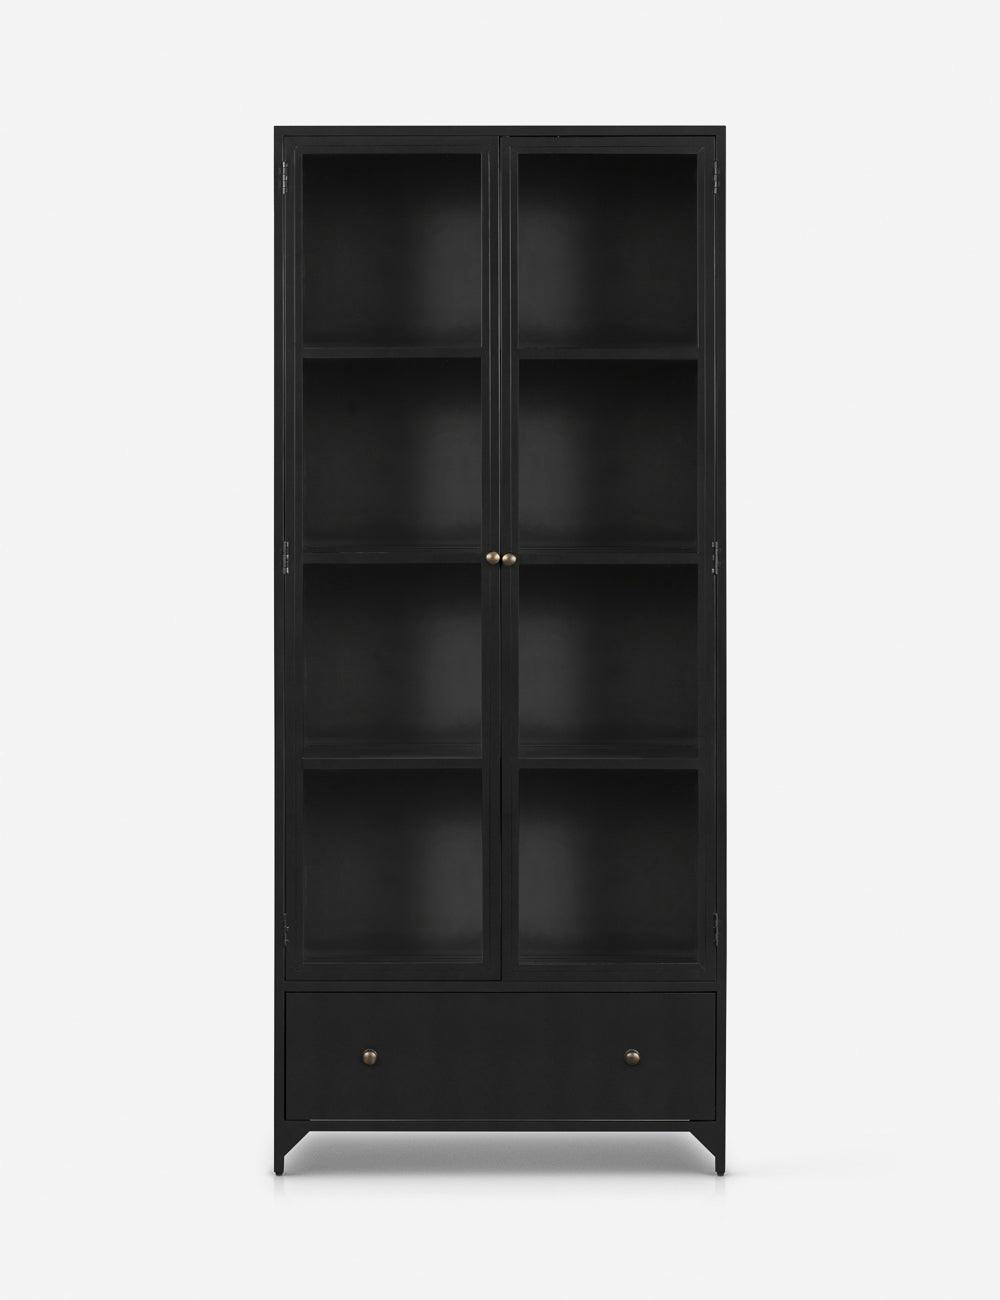 Elegant Black Iron Curio Cabinet with Glass Doors and Brass Knobs